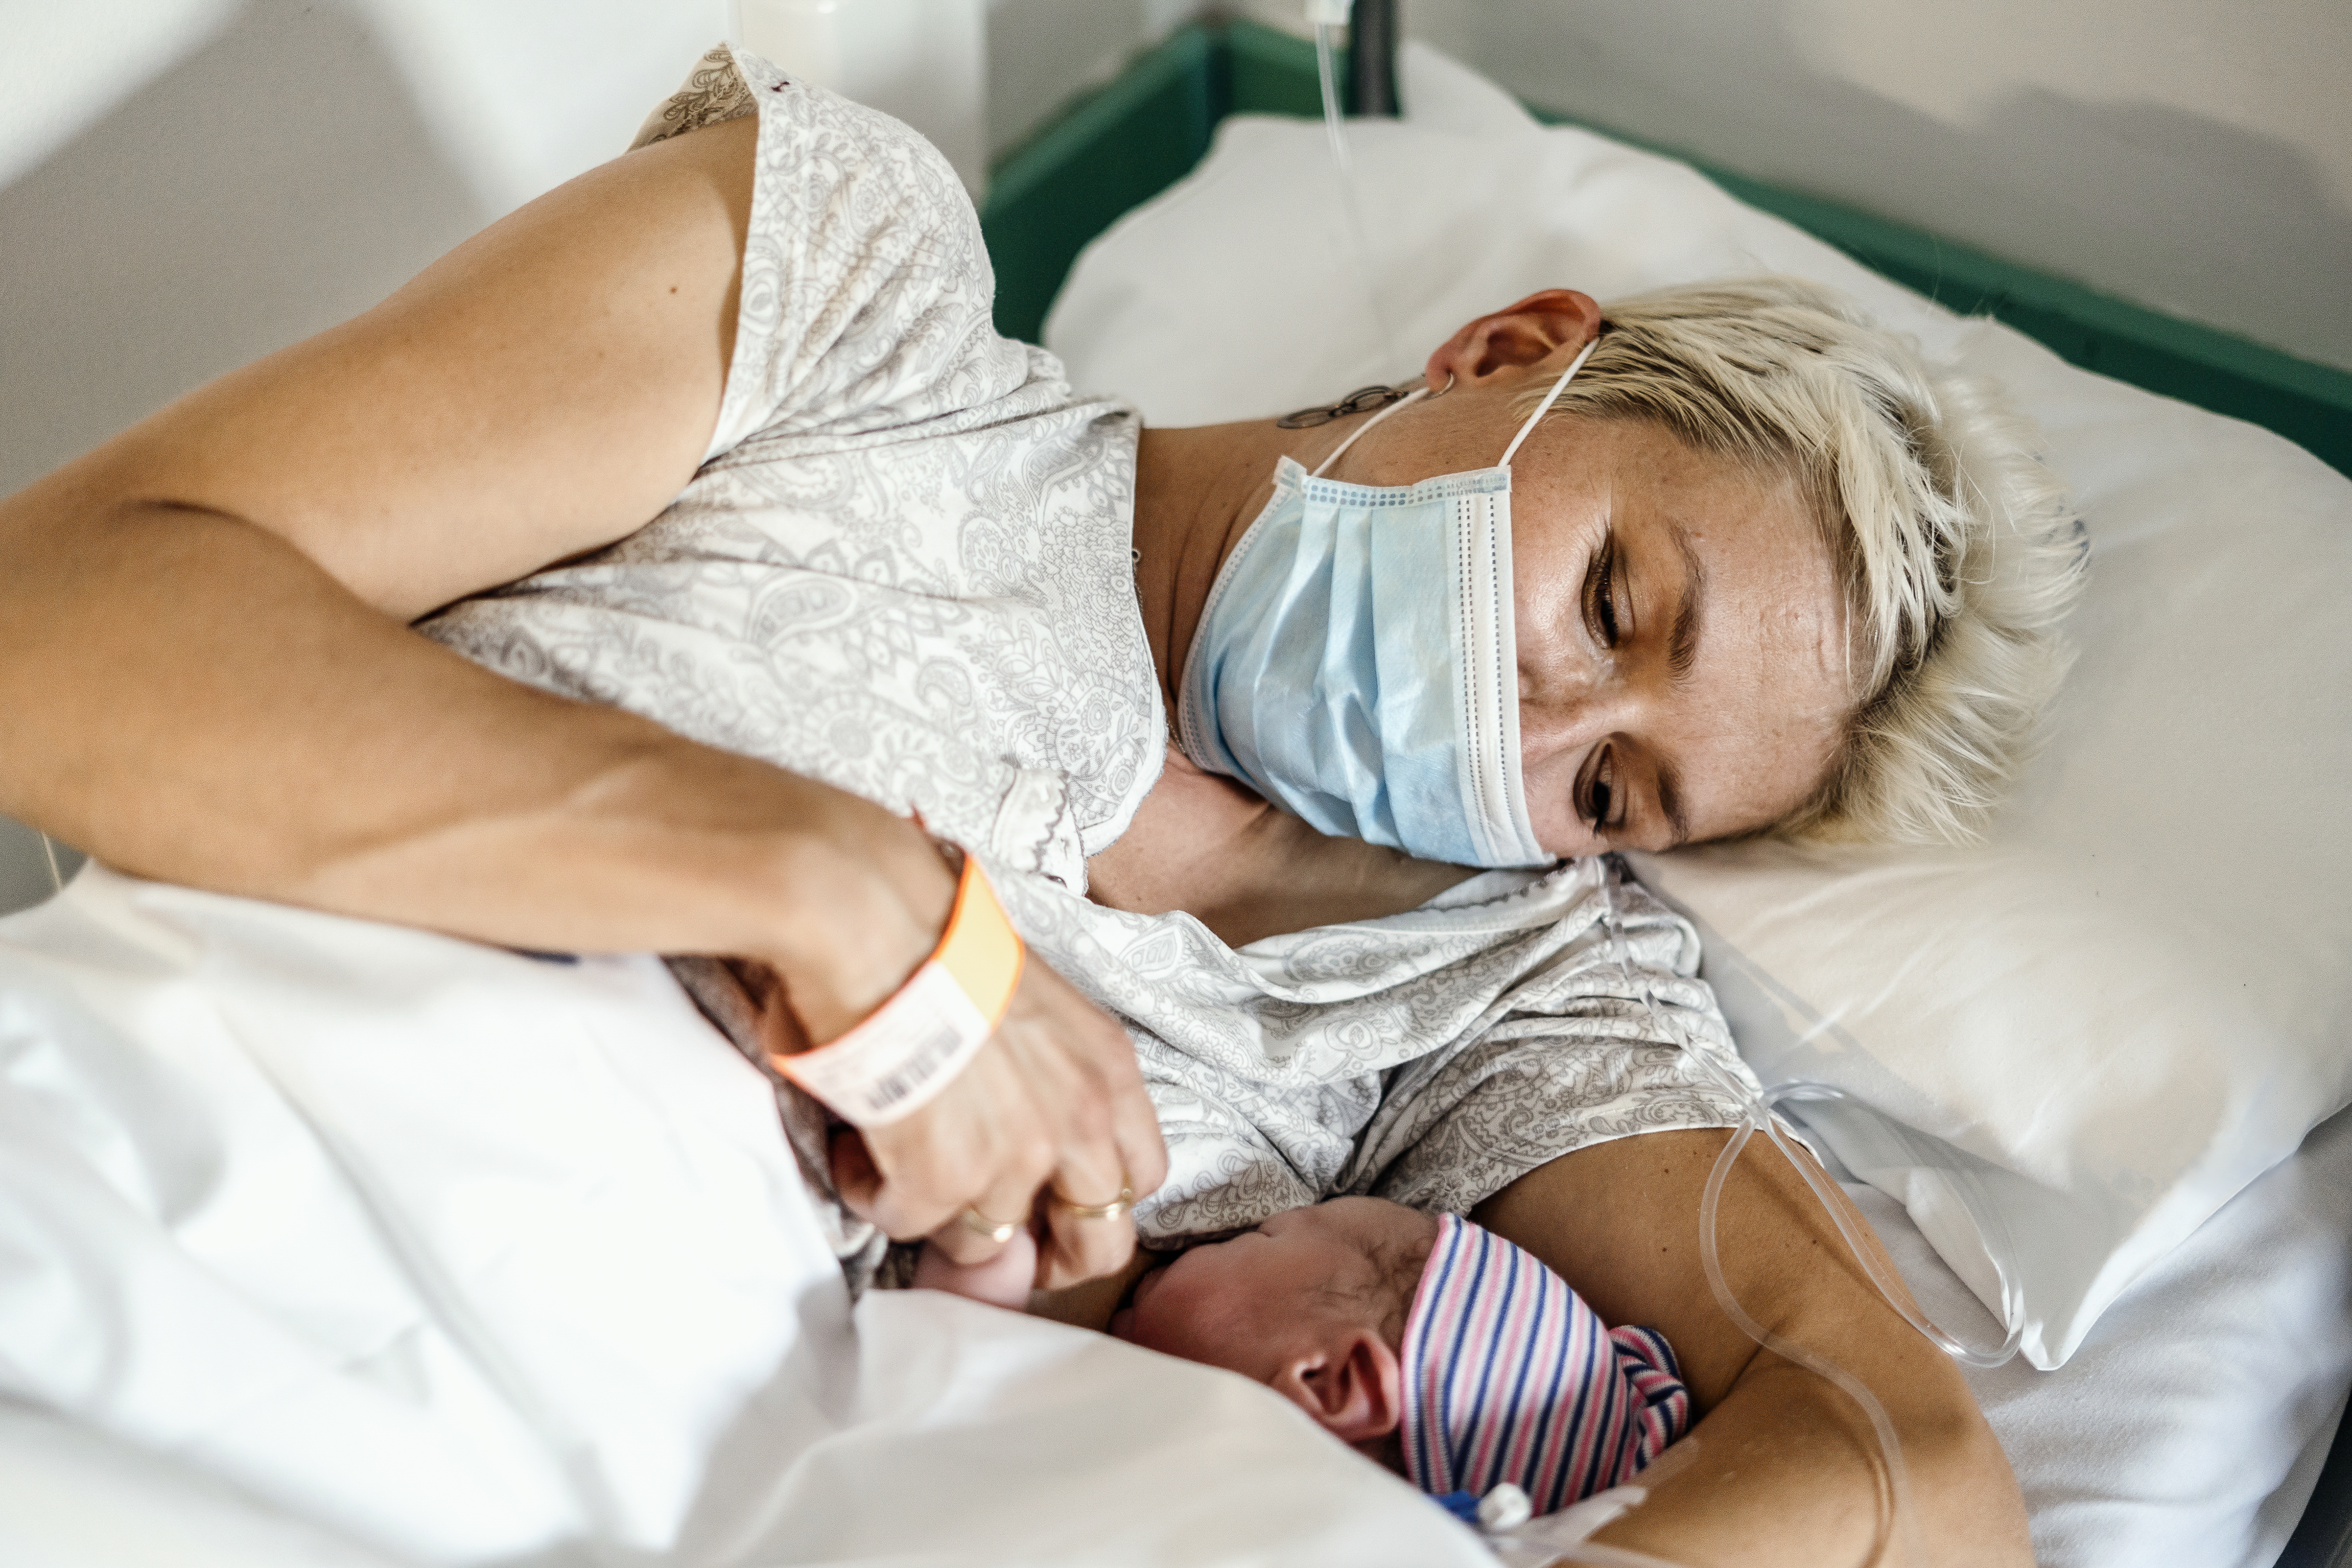 New parent body feeding their newborn while wearing a face mask in the hospital